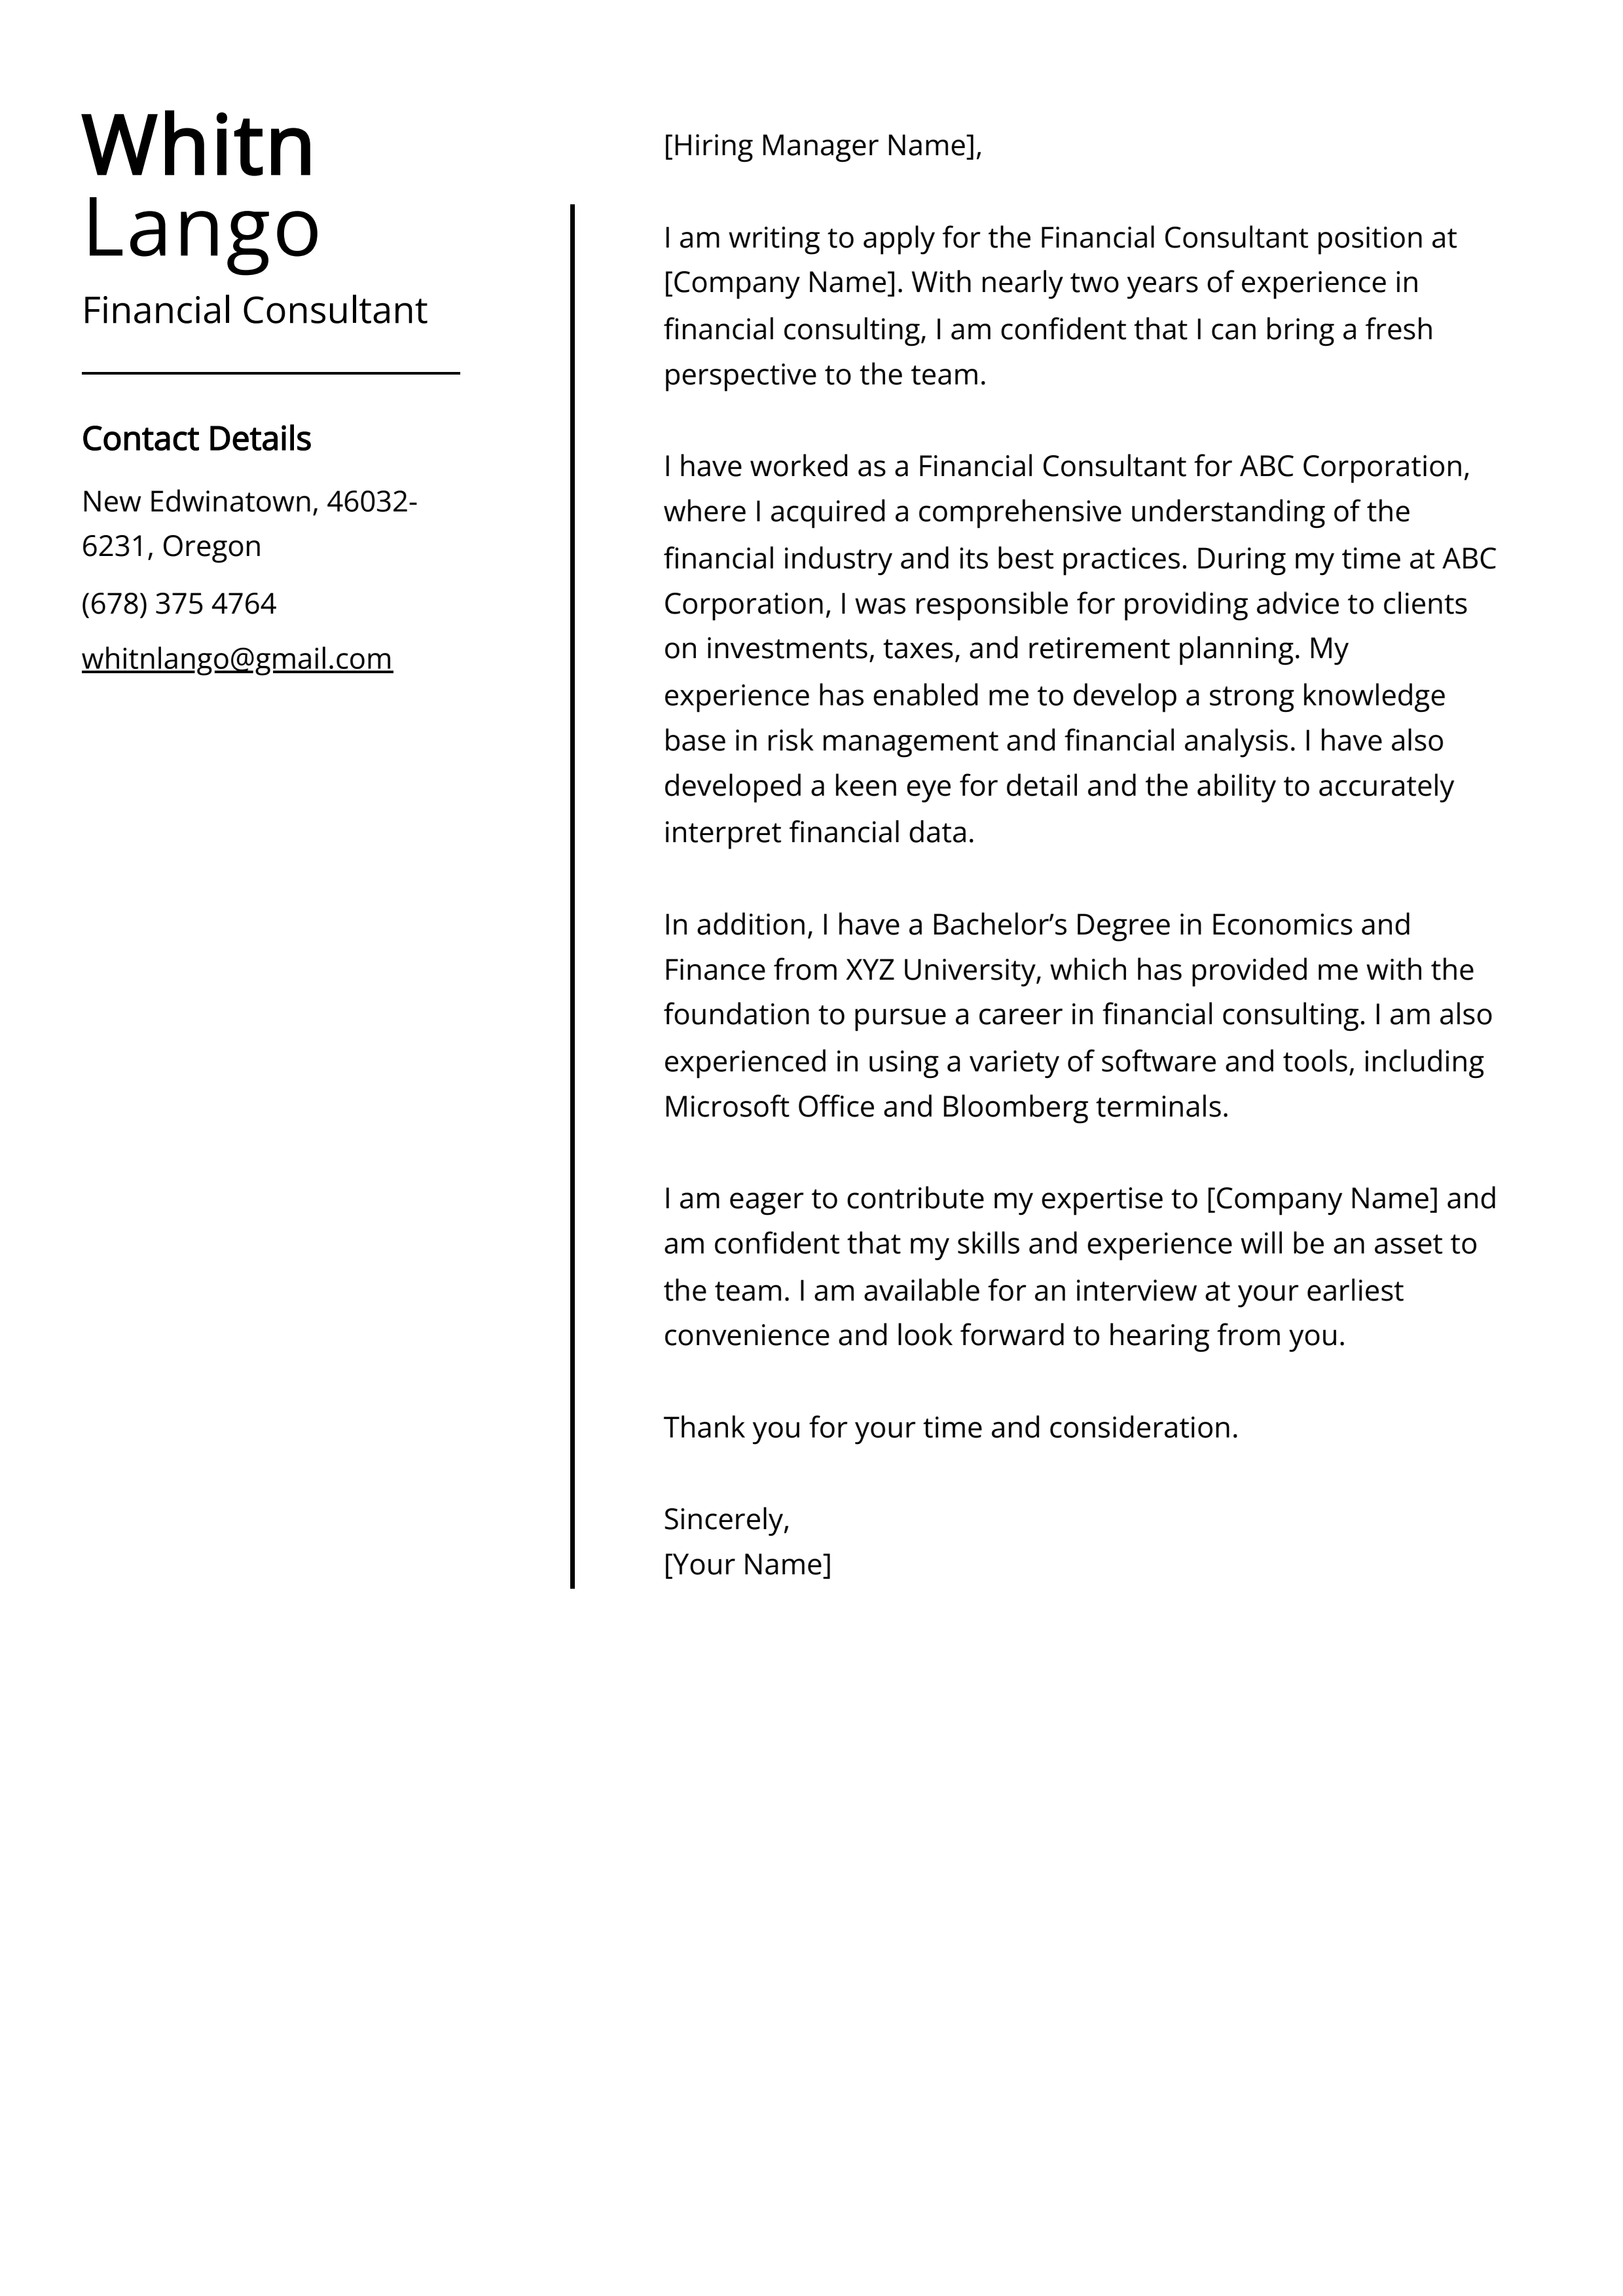 Financial Consultant Cover Letter Example